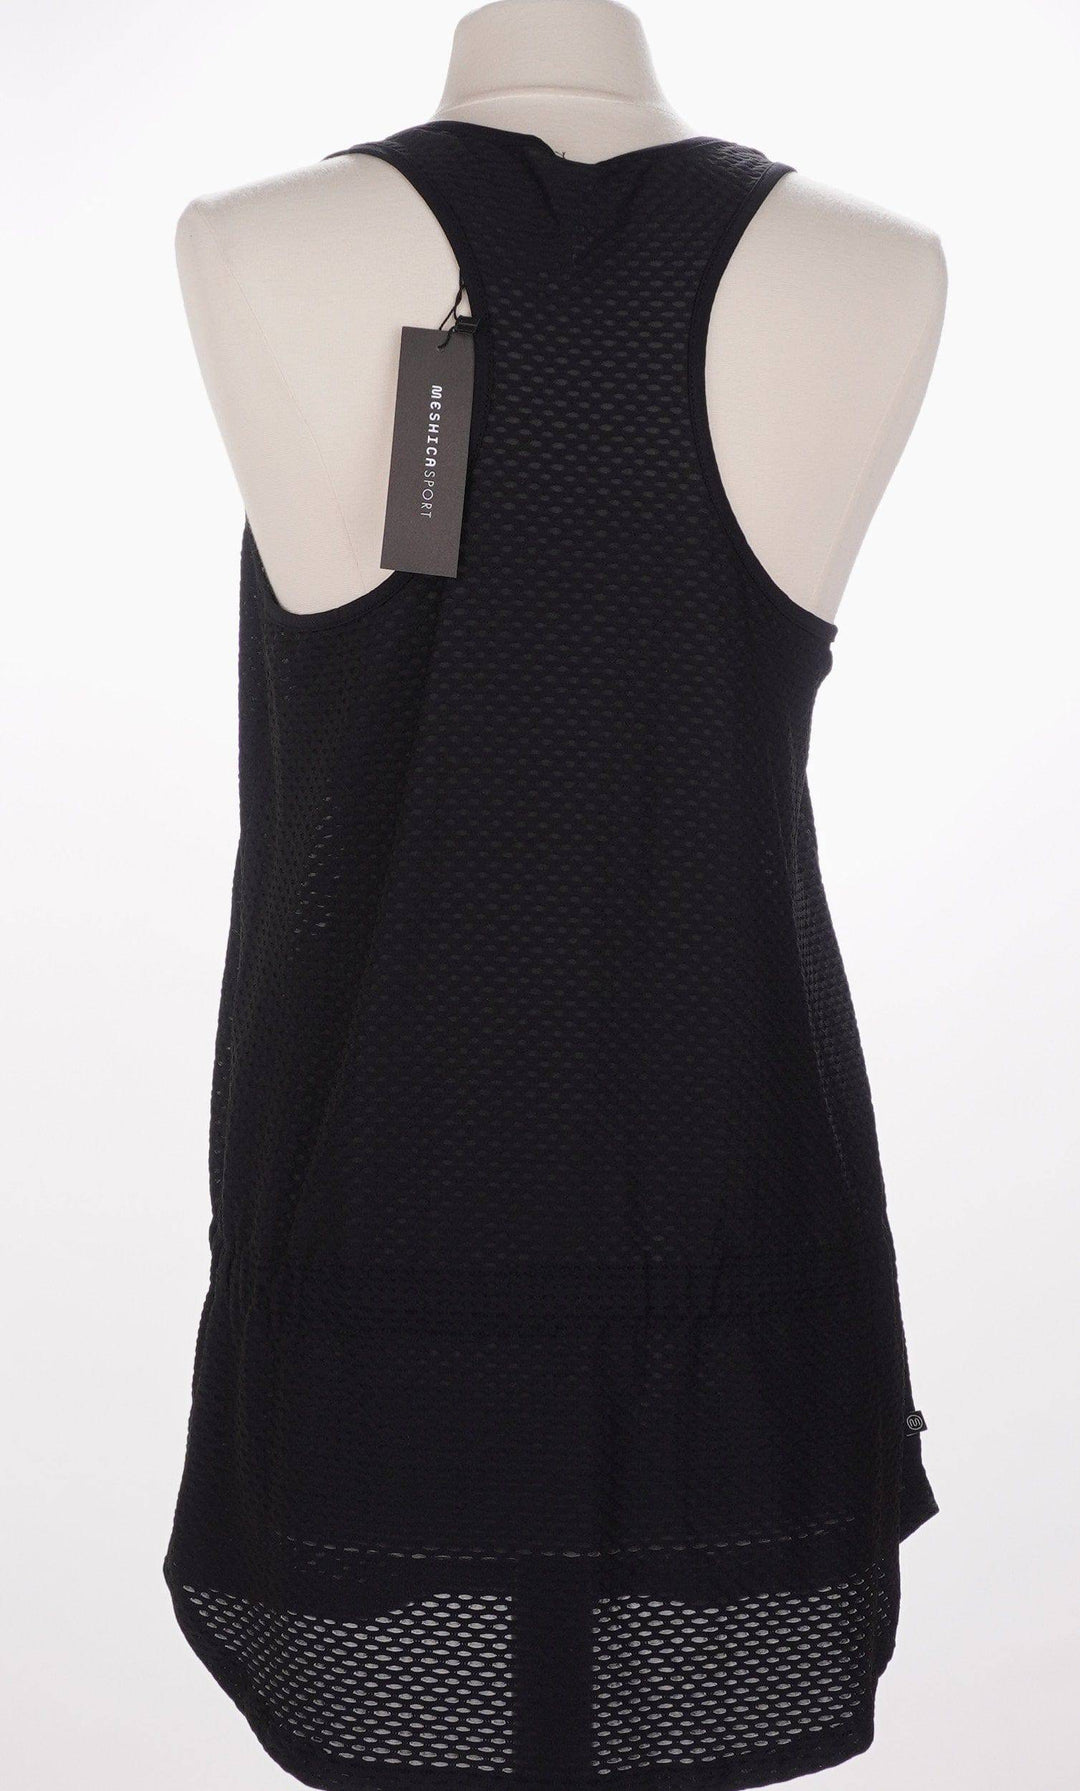 Meshica Sport Black / X-Large / Consigned-New With Tags Meshica Sport Sleeveless Shirt - Black - Size Large